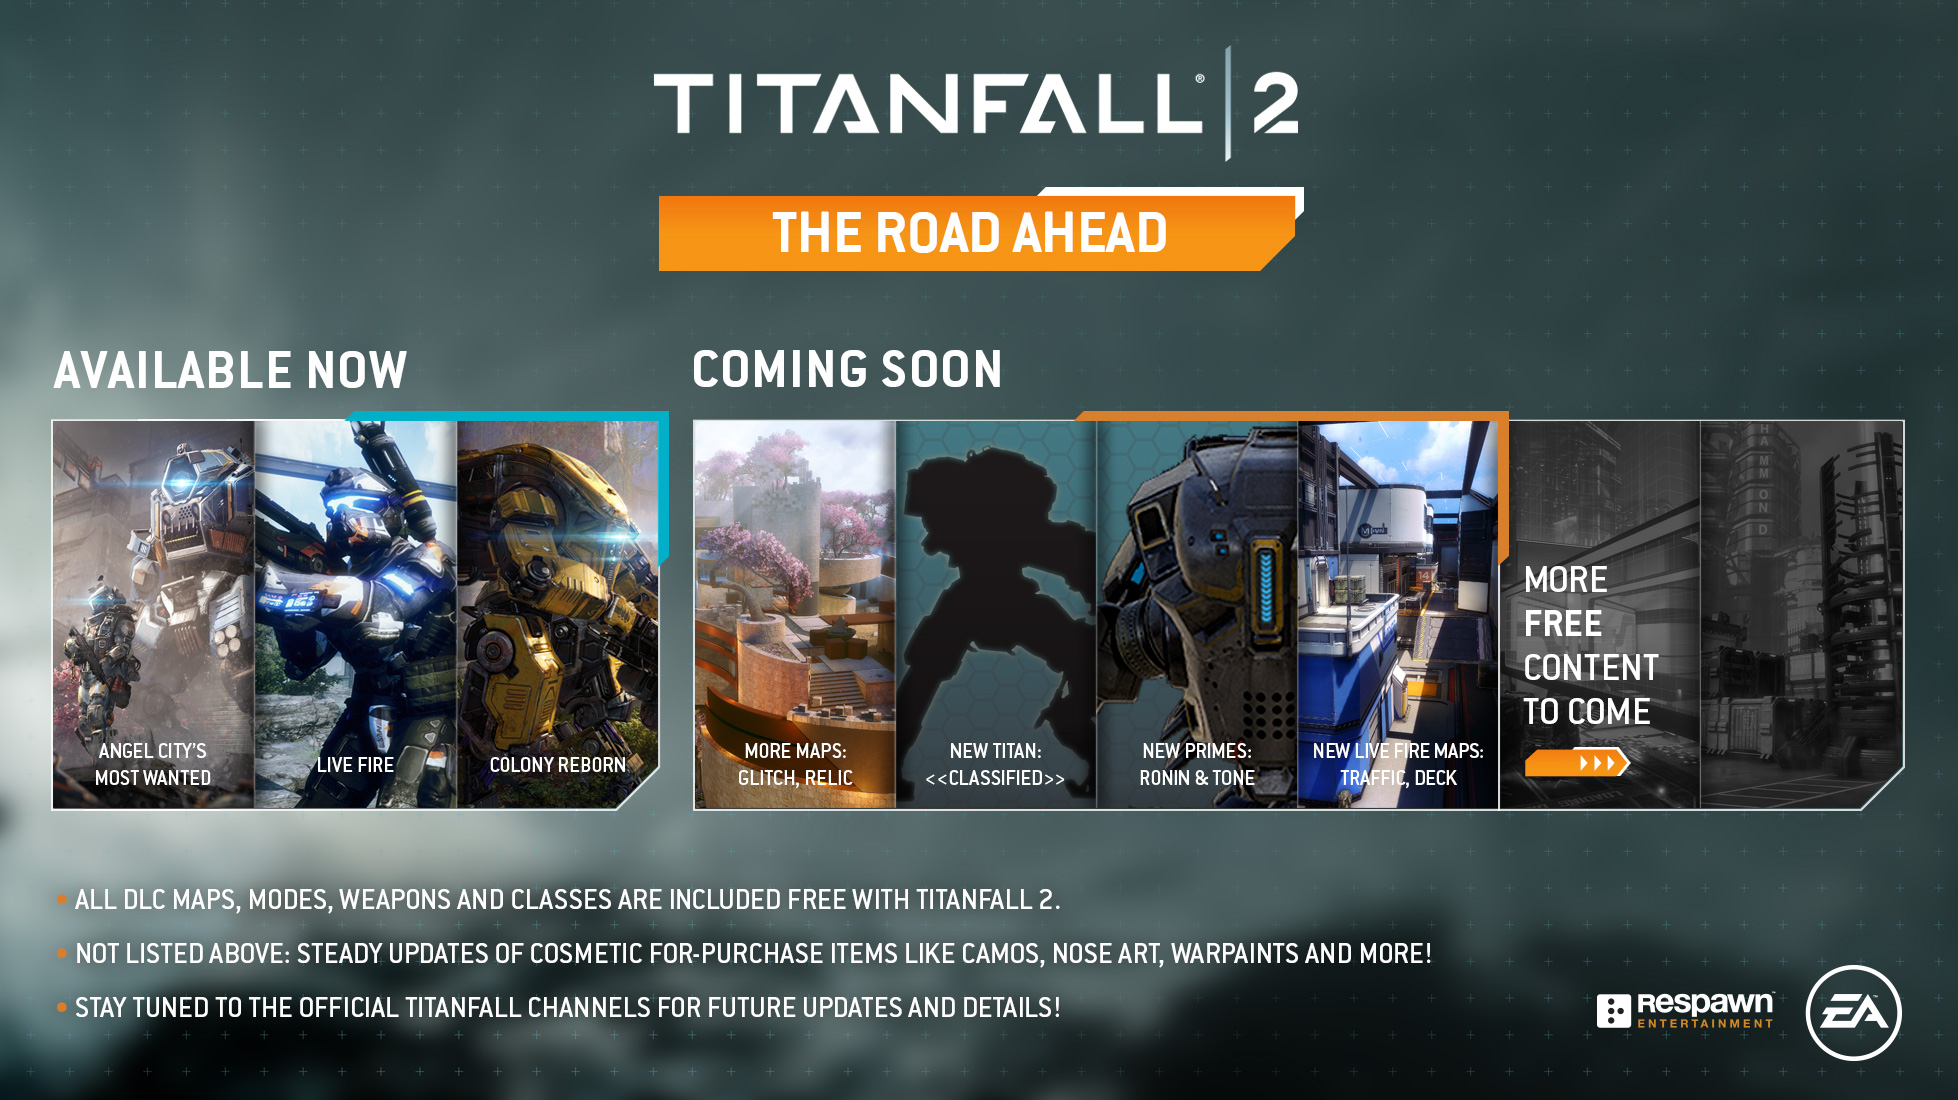 Titanfall 2 beta release dates on PS4 and Xbox One: Titanfall 2 codes  reveal new details, Gaming, Entertainment